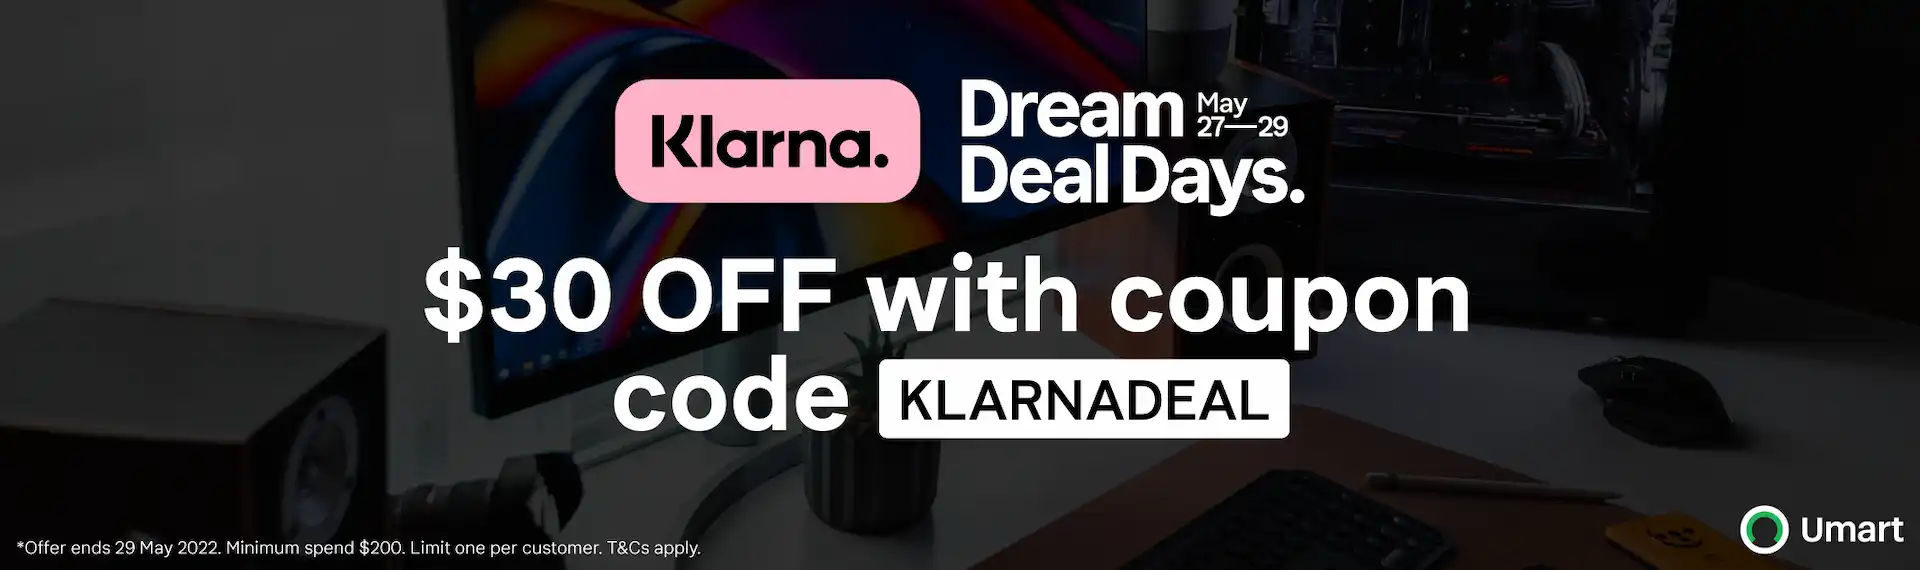 Umart extra $30 OFF when you spend $100 using Klarna with promo code